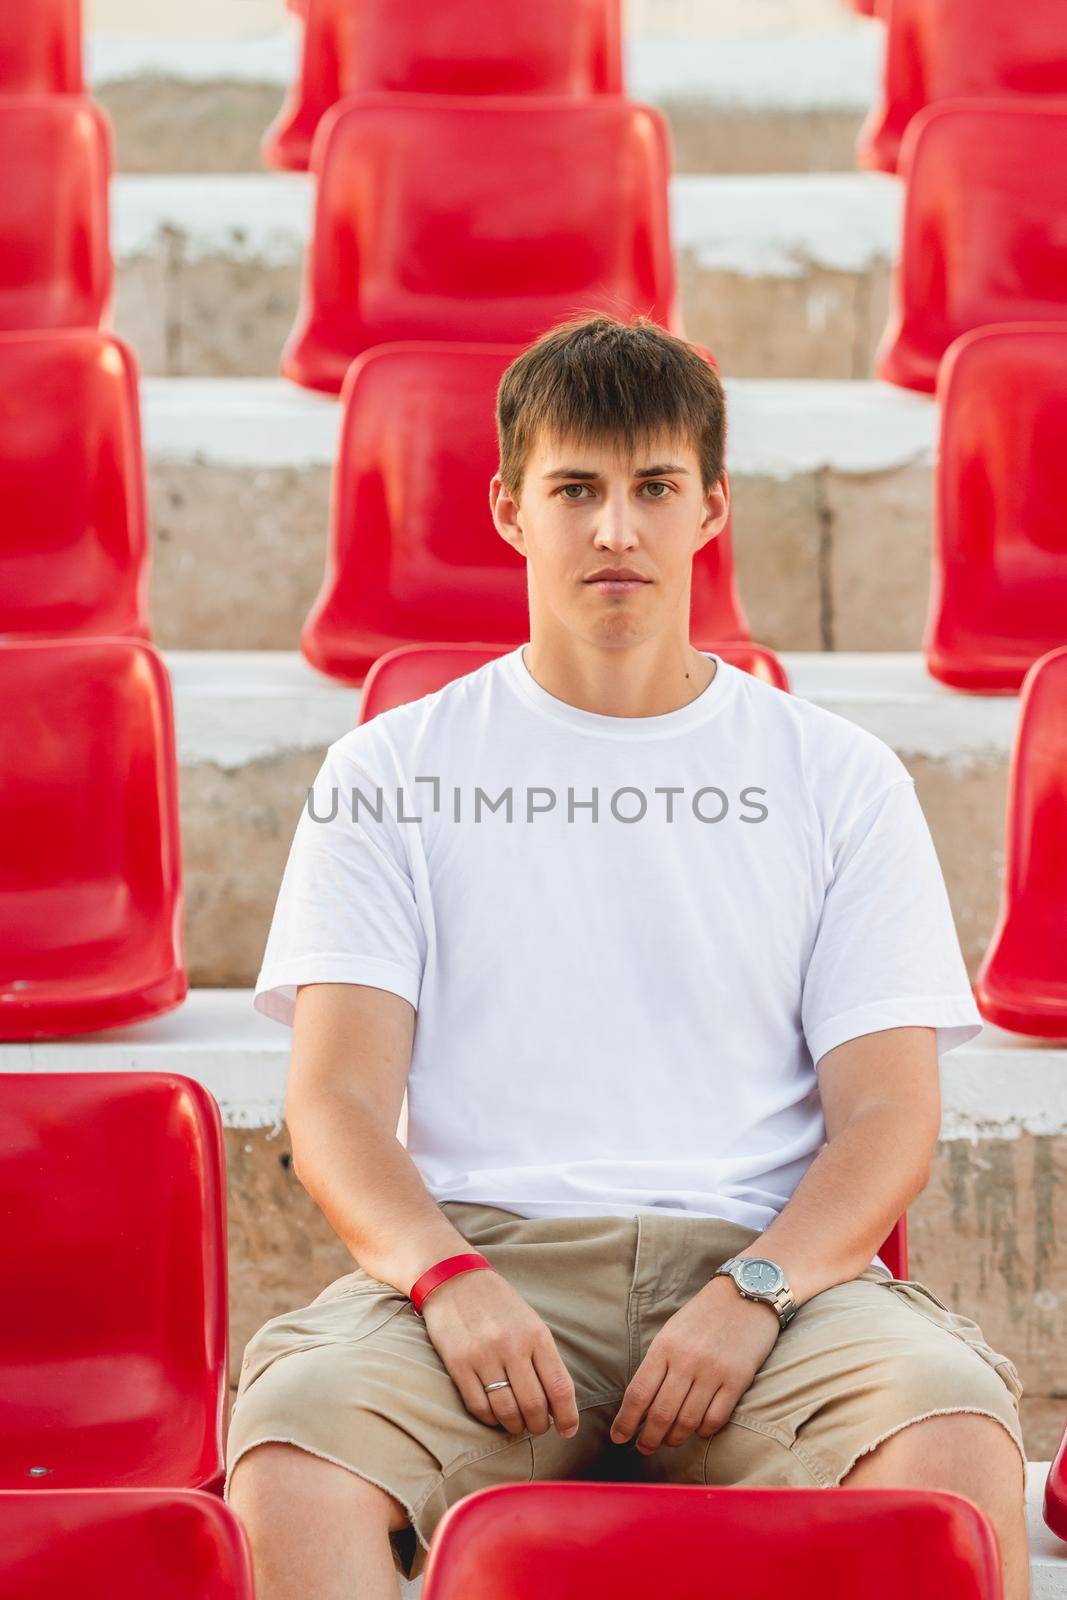 Bored young man sitting in deserted audience with bright red seats. Absence of people in open-air amphitheater due to coronavirus COVID-19 pandemic lockdown and quarantine. by aksenovko